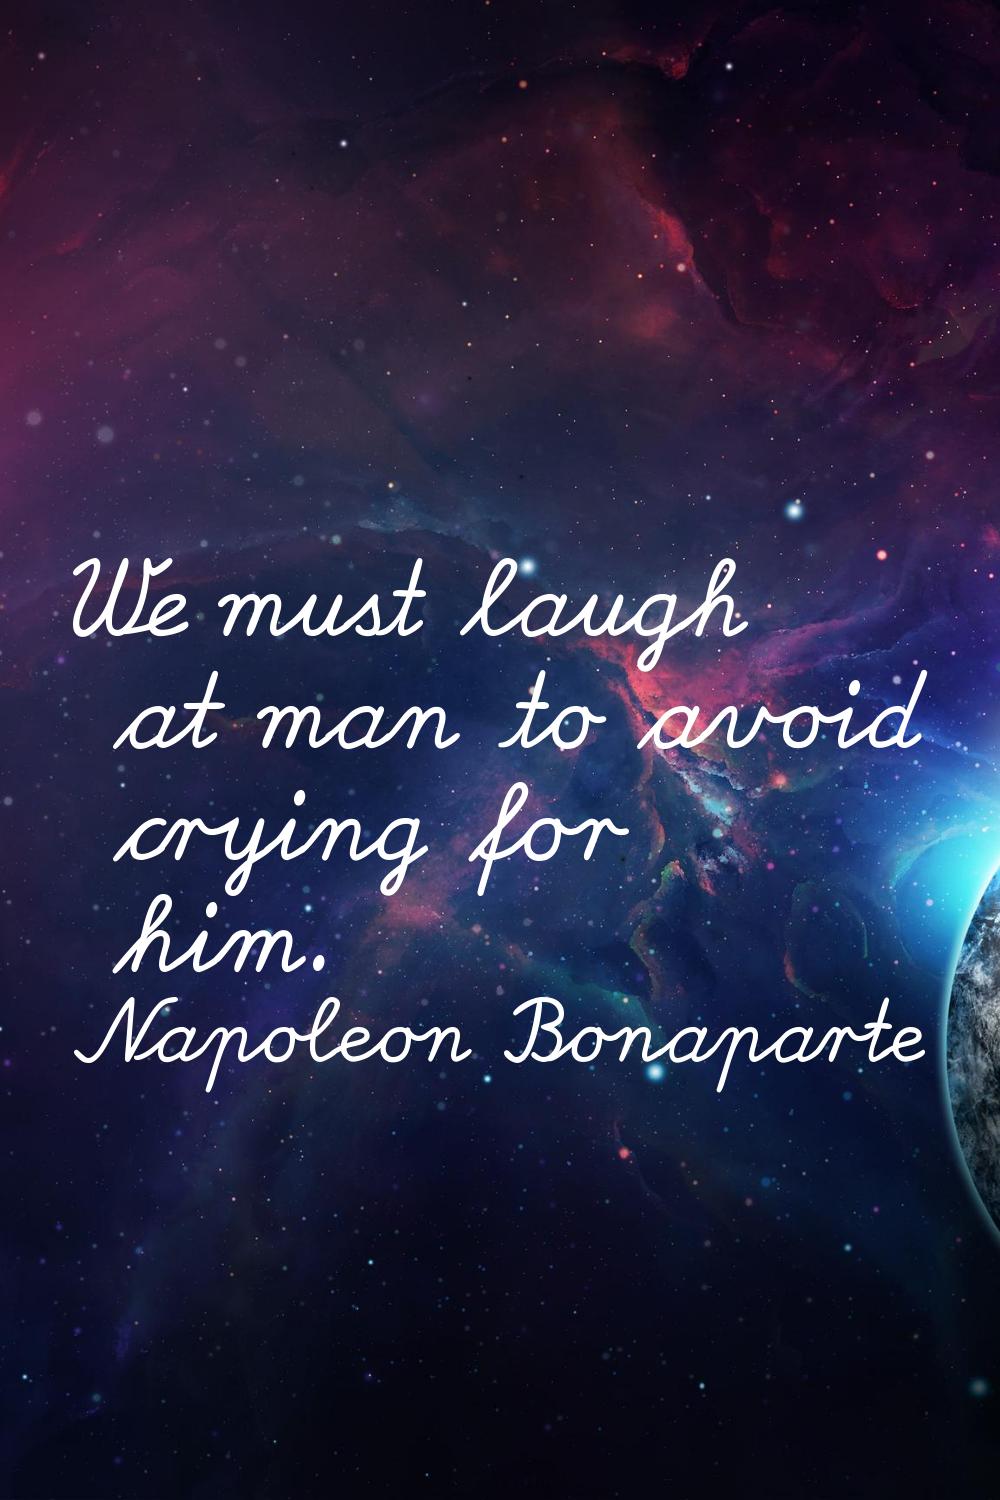 We must laugh at man to avoid crying for him.